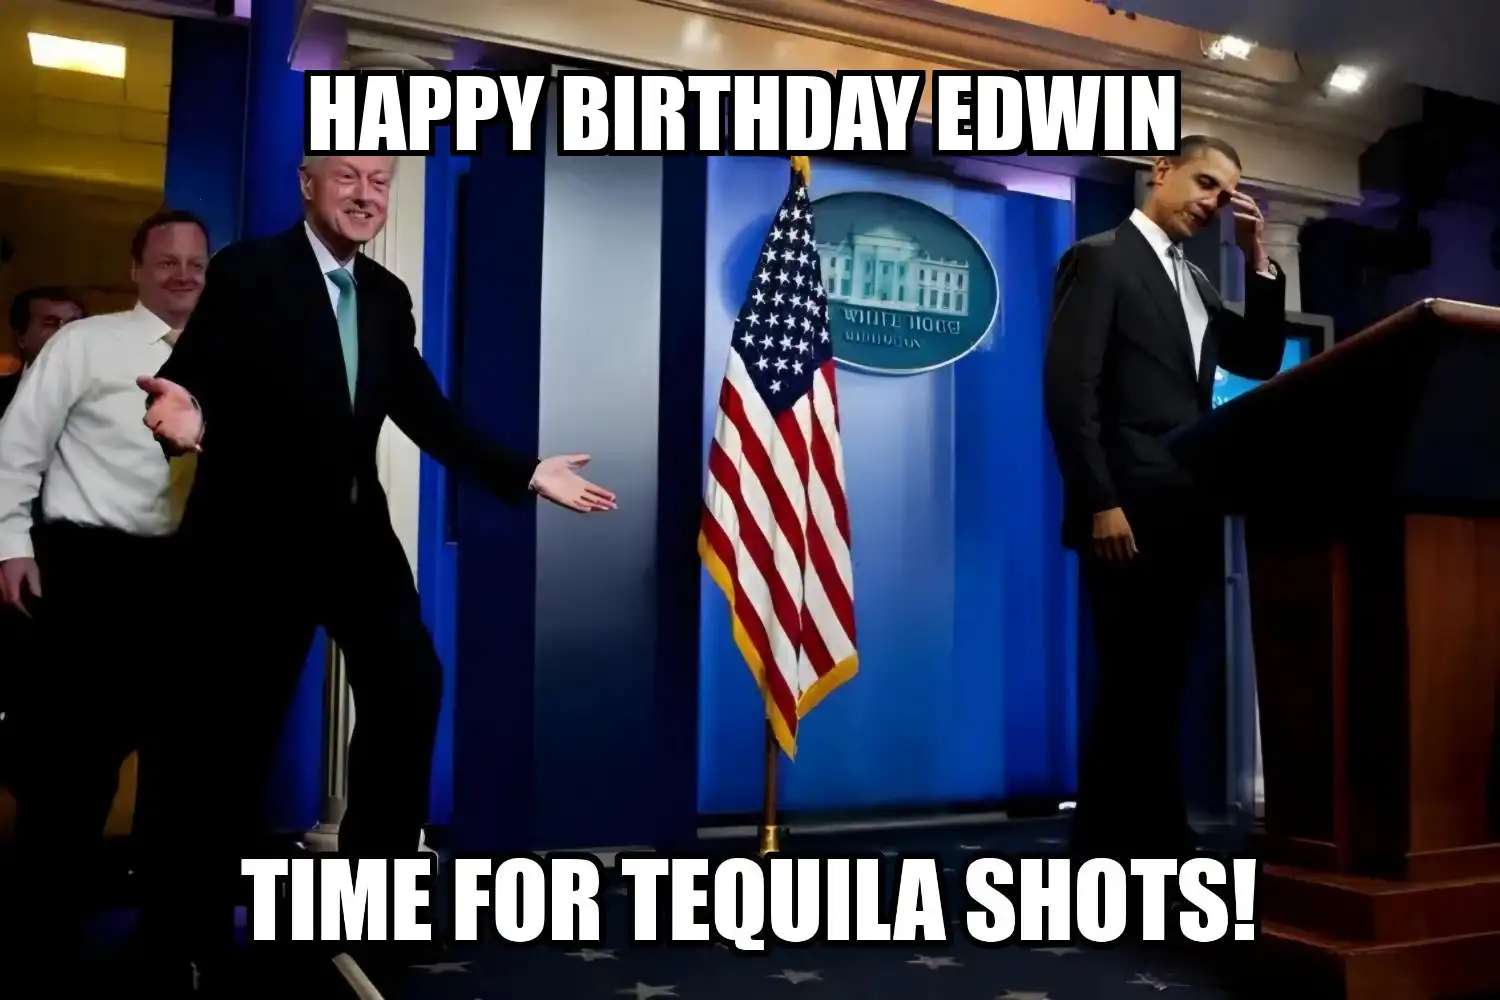 Happy Birthday Edwin Time For Tequila Shots Memes